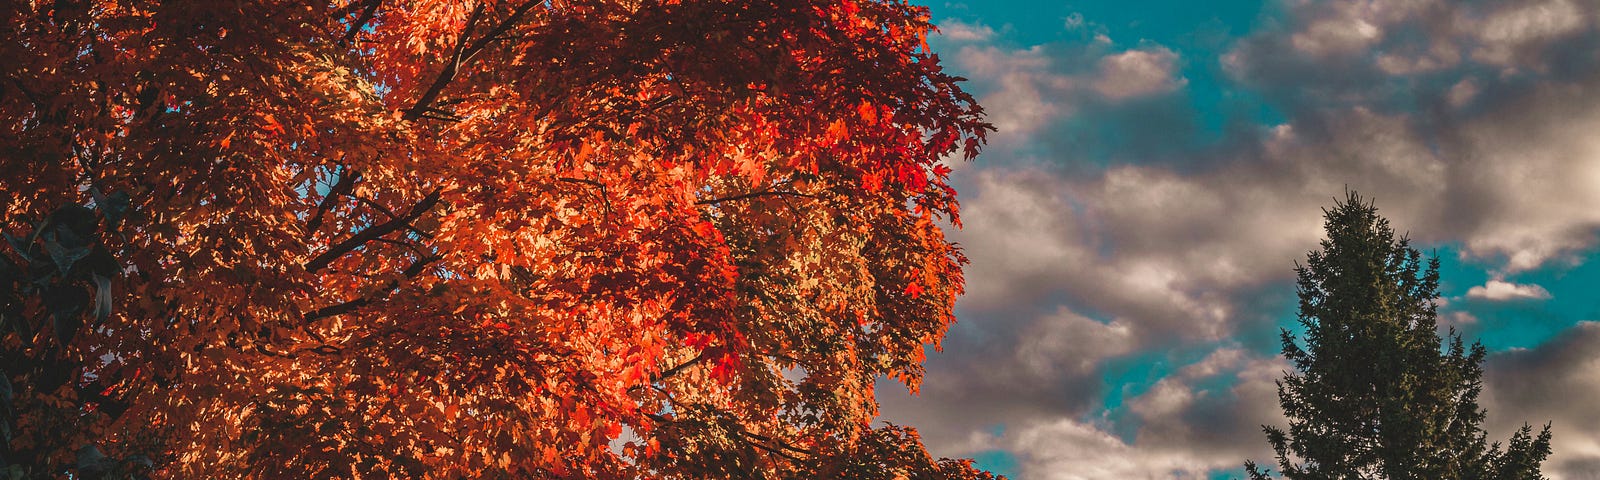 Tree with colorful autumn leaves against a cloudy blue sky